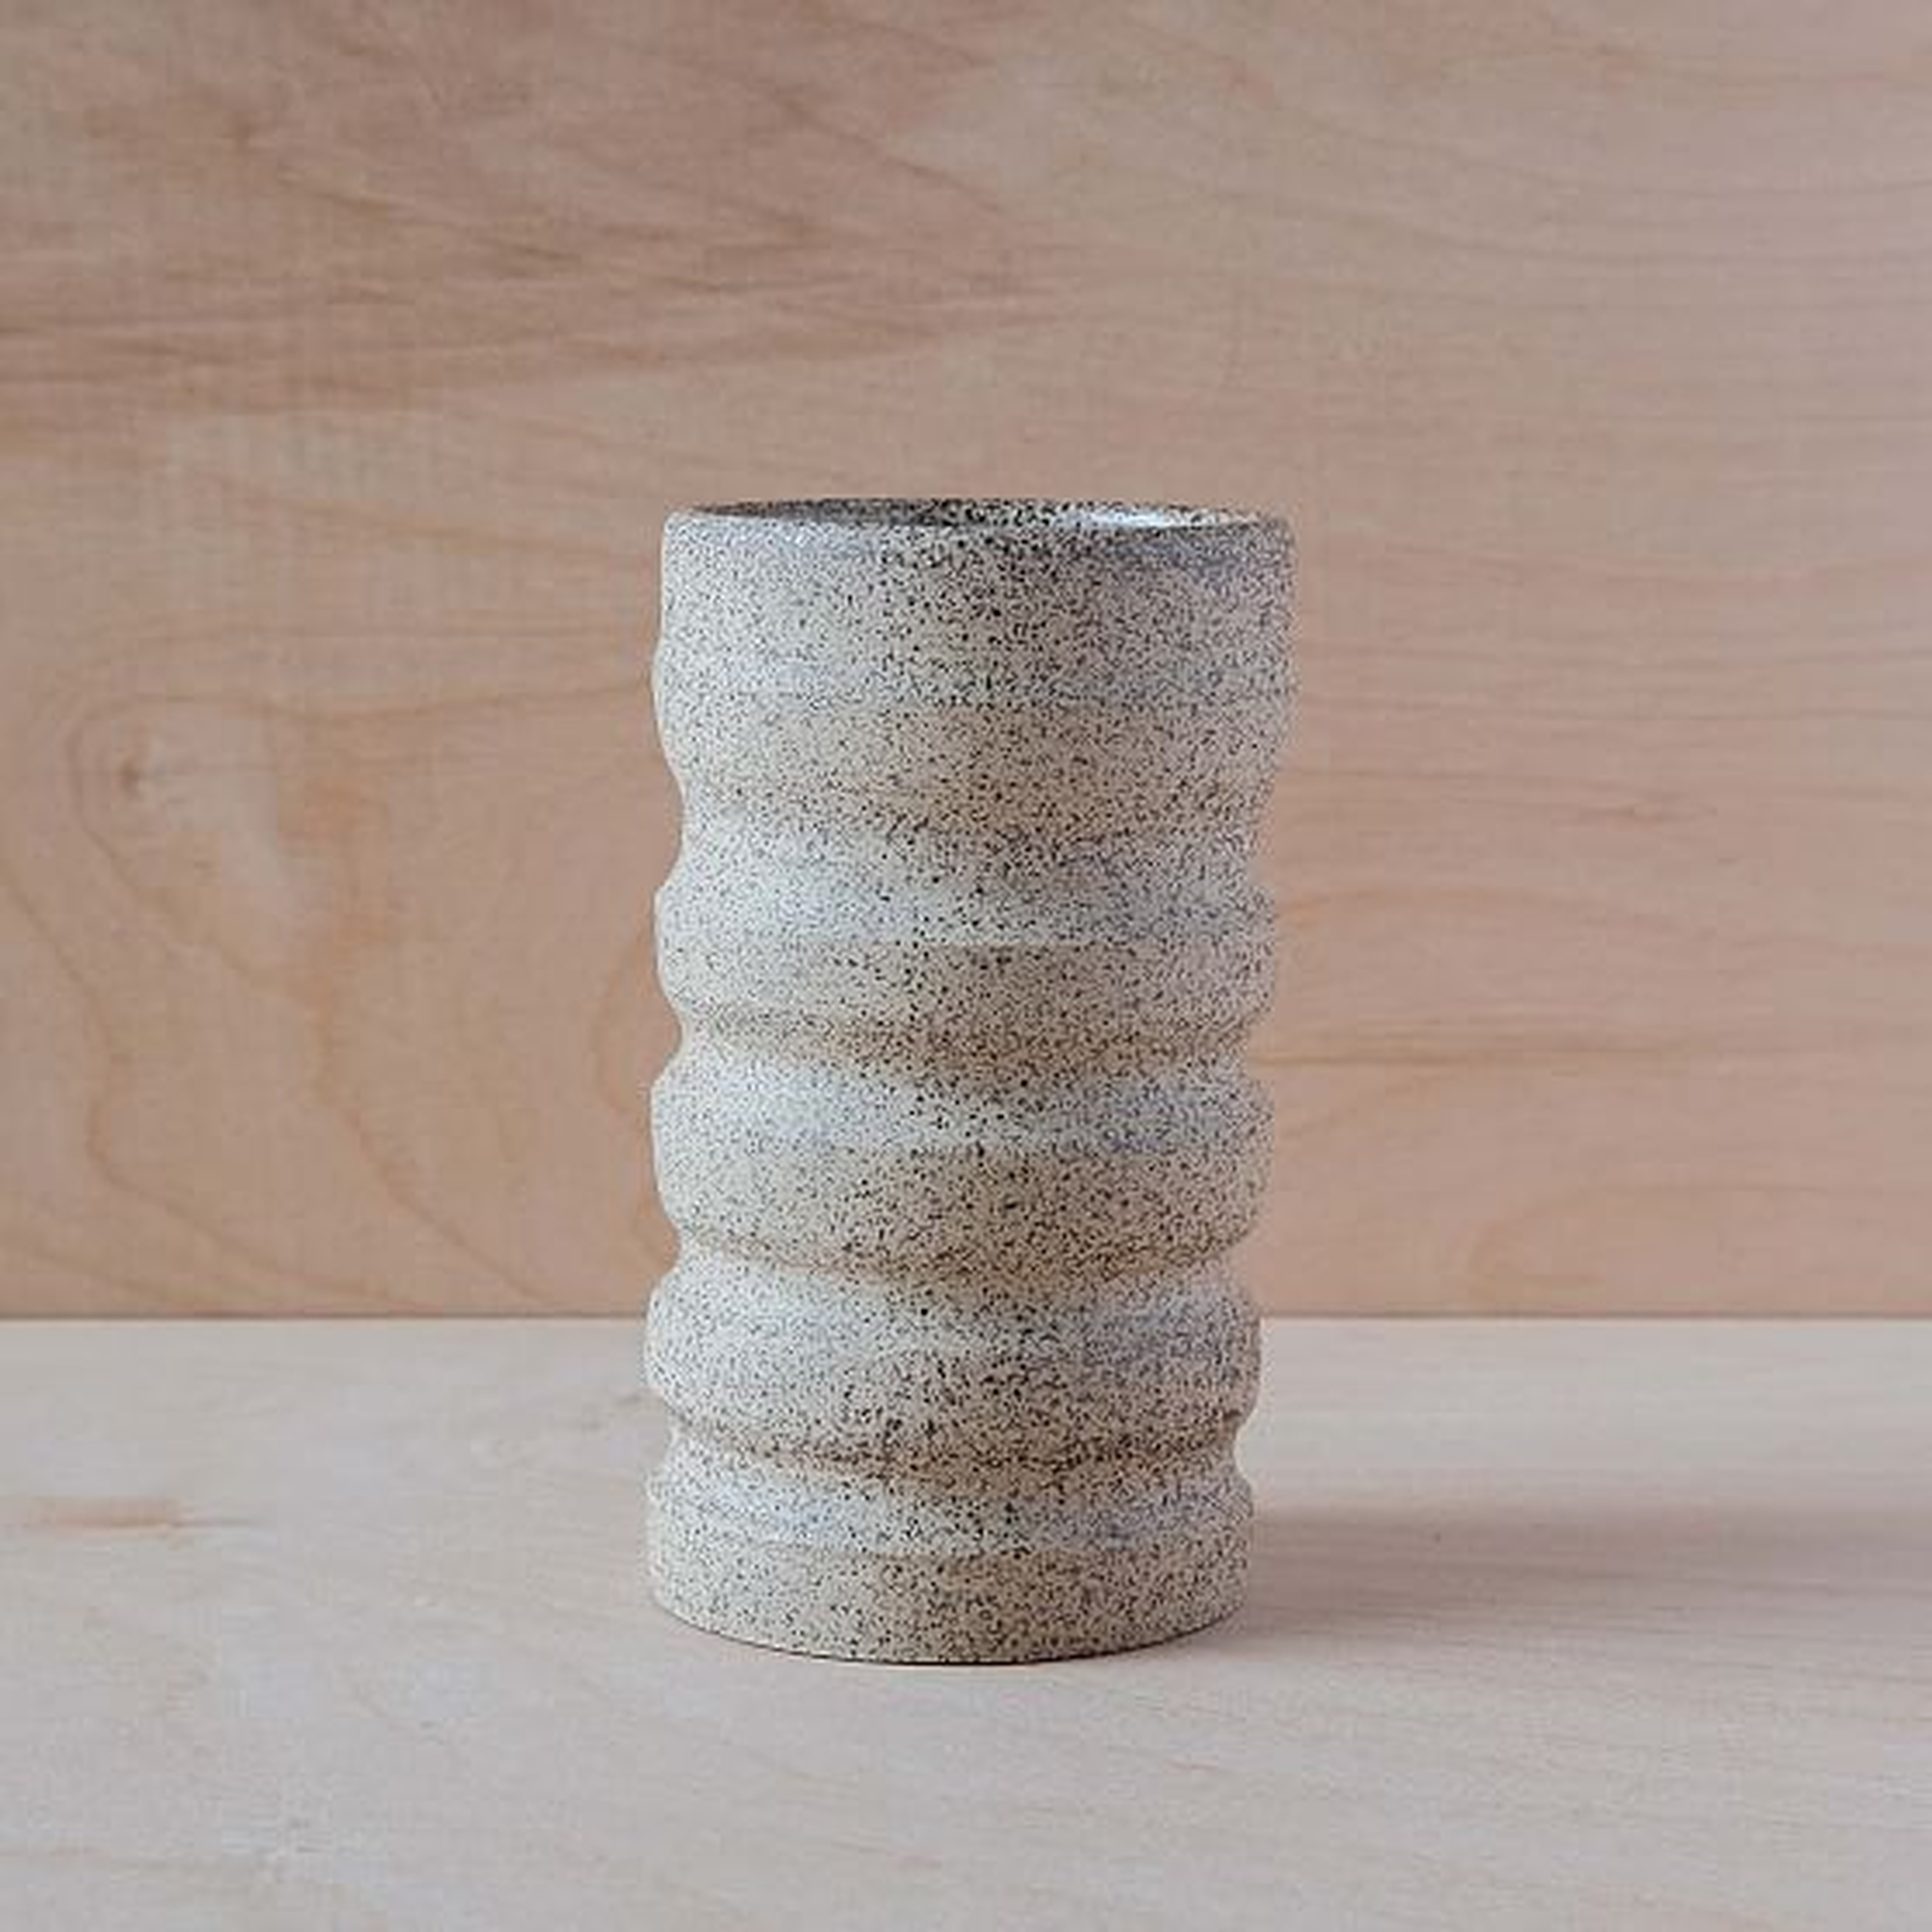 Utility Objects Small Vase, Natural Sand - West Elm